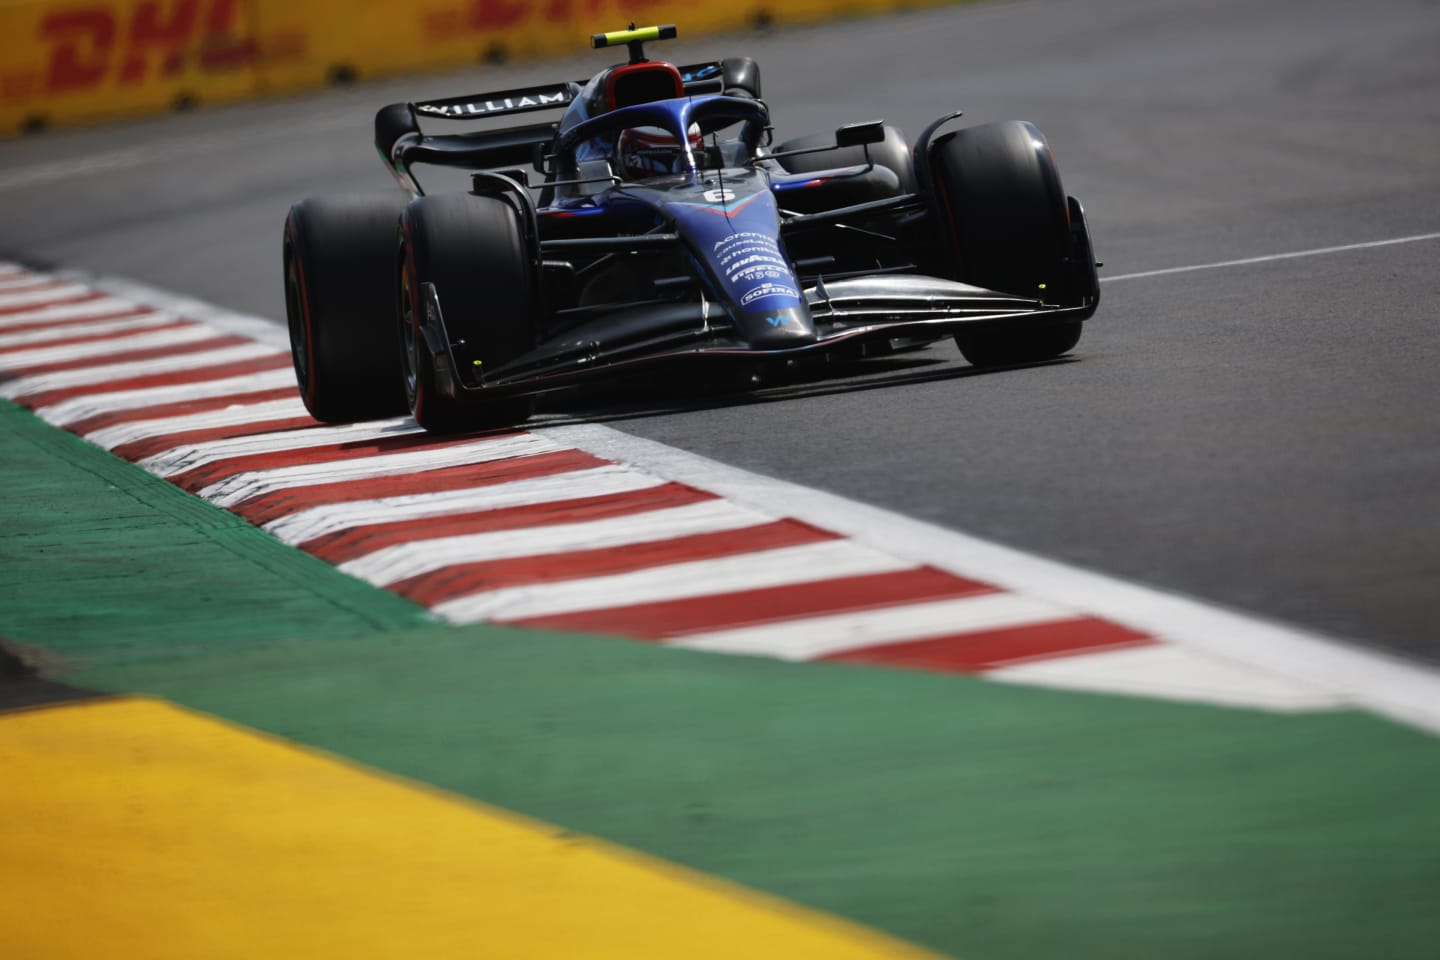 MEXICO CITY, MEXICO - OCTOBER 29: Nicholas Latifi of Canada driving the (6) Williams FW44 Mercedes on track during final practice ahead of the F1 Grand Prix of Mexico at Autodromo Hermanos Rodriguez on October 29, 2022 in Mexico City, Mexico. (Photo by Chris Graythen/Getty Images)